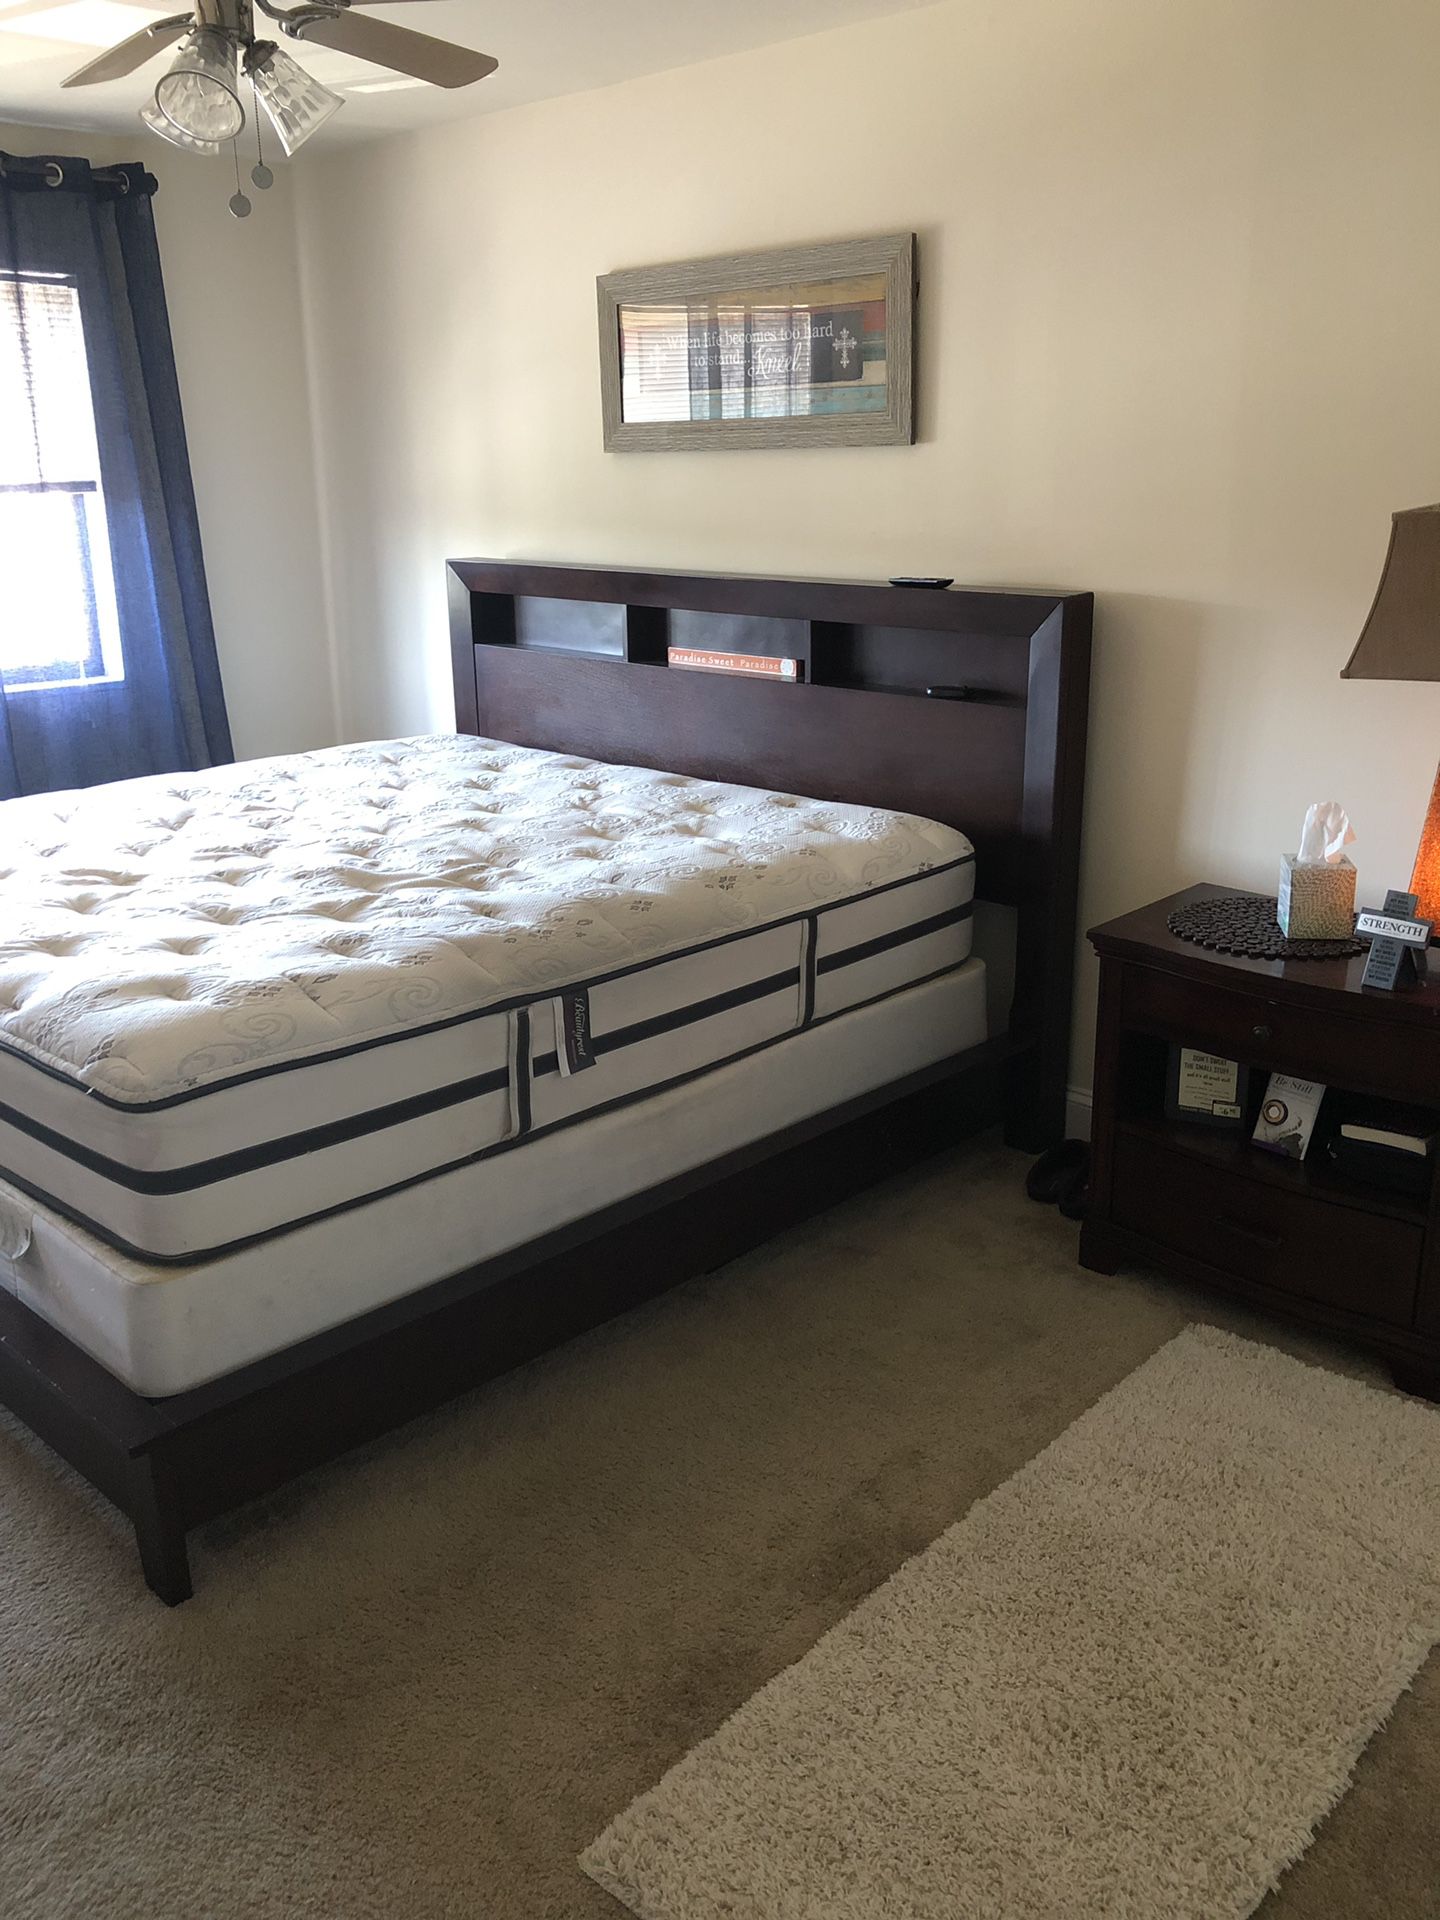 MOVING SALE: King bedroom set w/ Mattress and box springs!